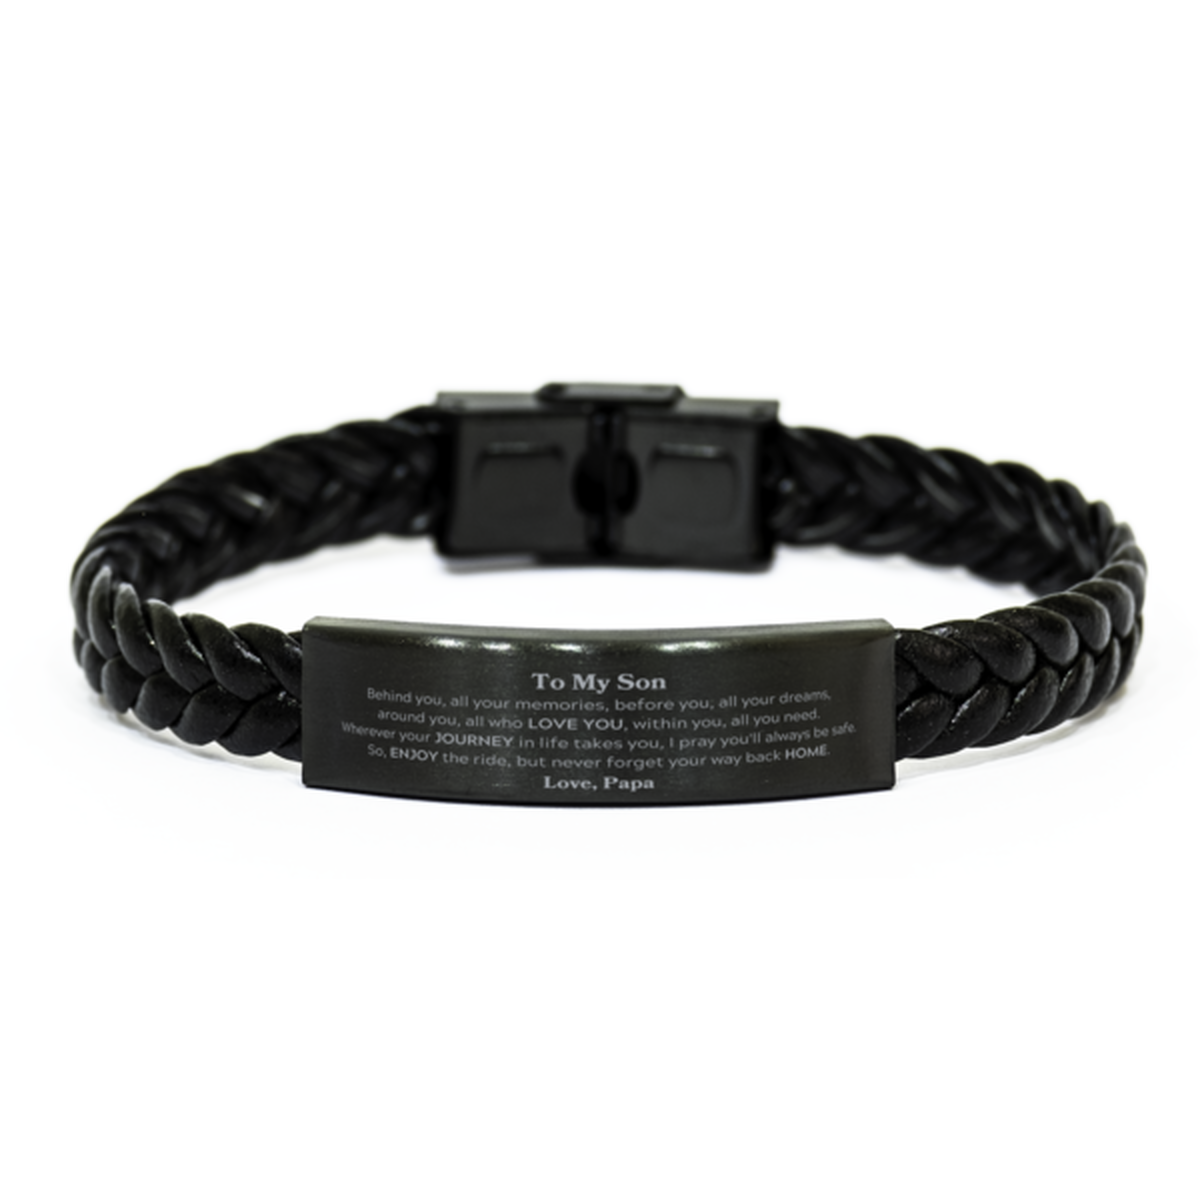 To My Son Graduation Gifts from Papa, Son Braided Leather Bracelet Christmas Birthday Gifts for Son Behind you, all your memories, before you, all your dreams. Love, Papa